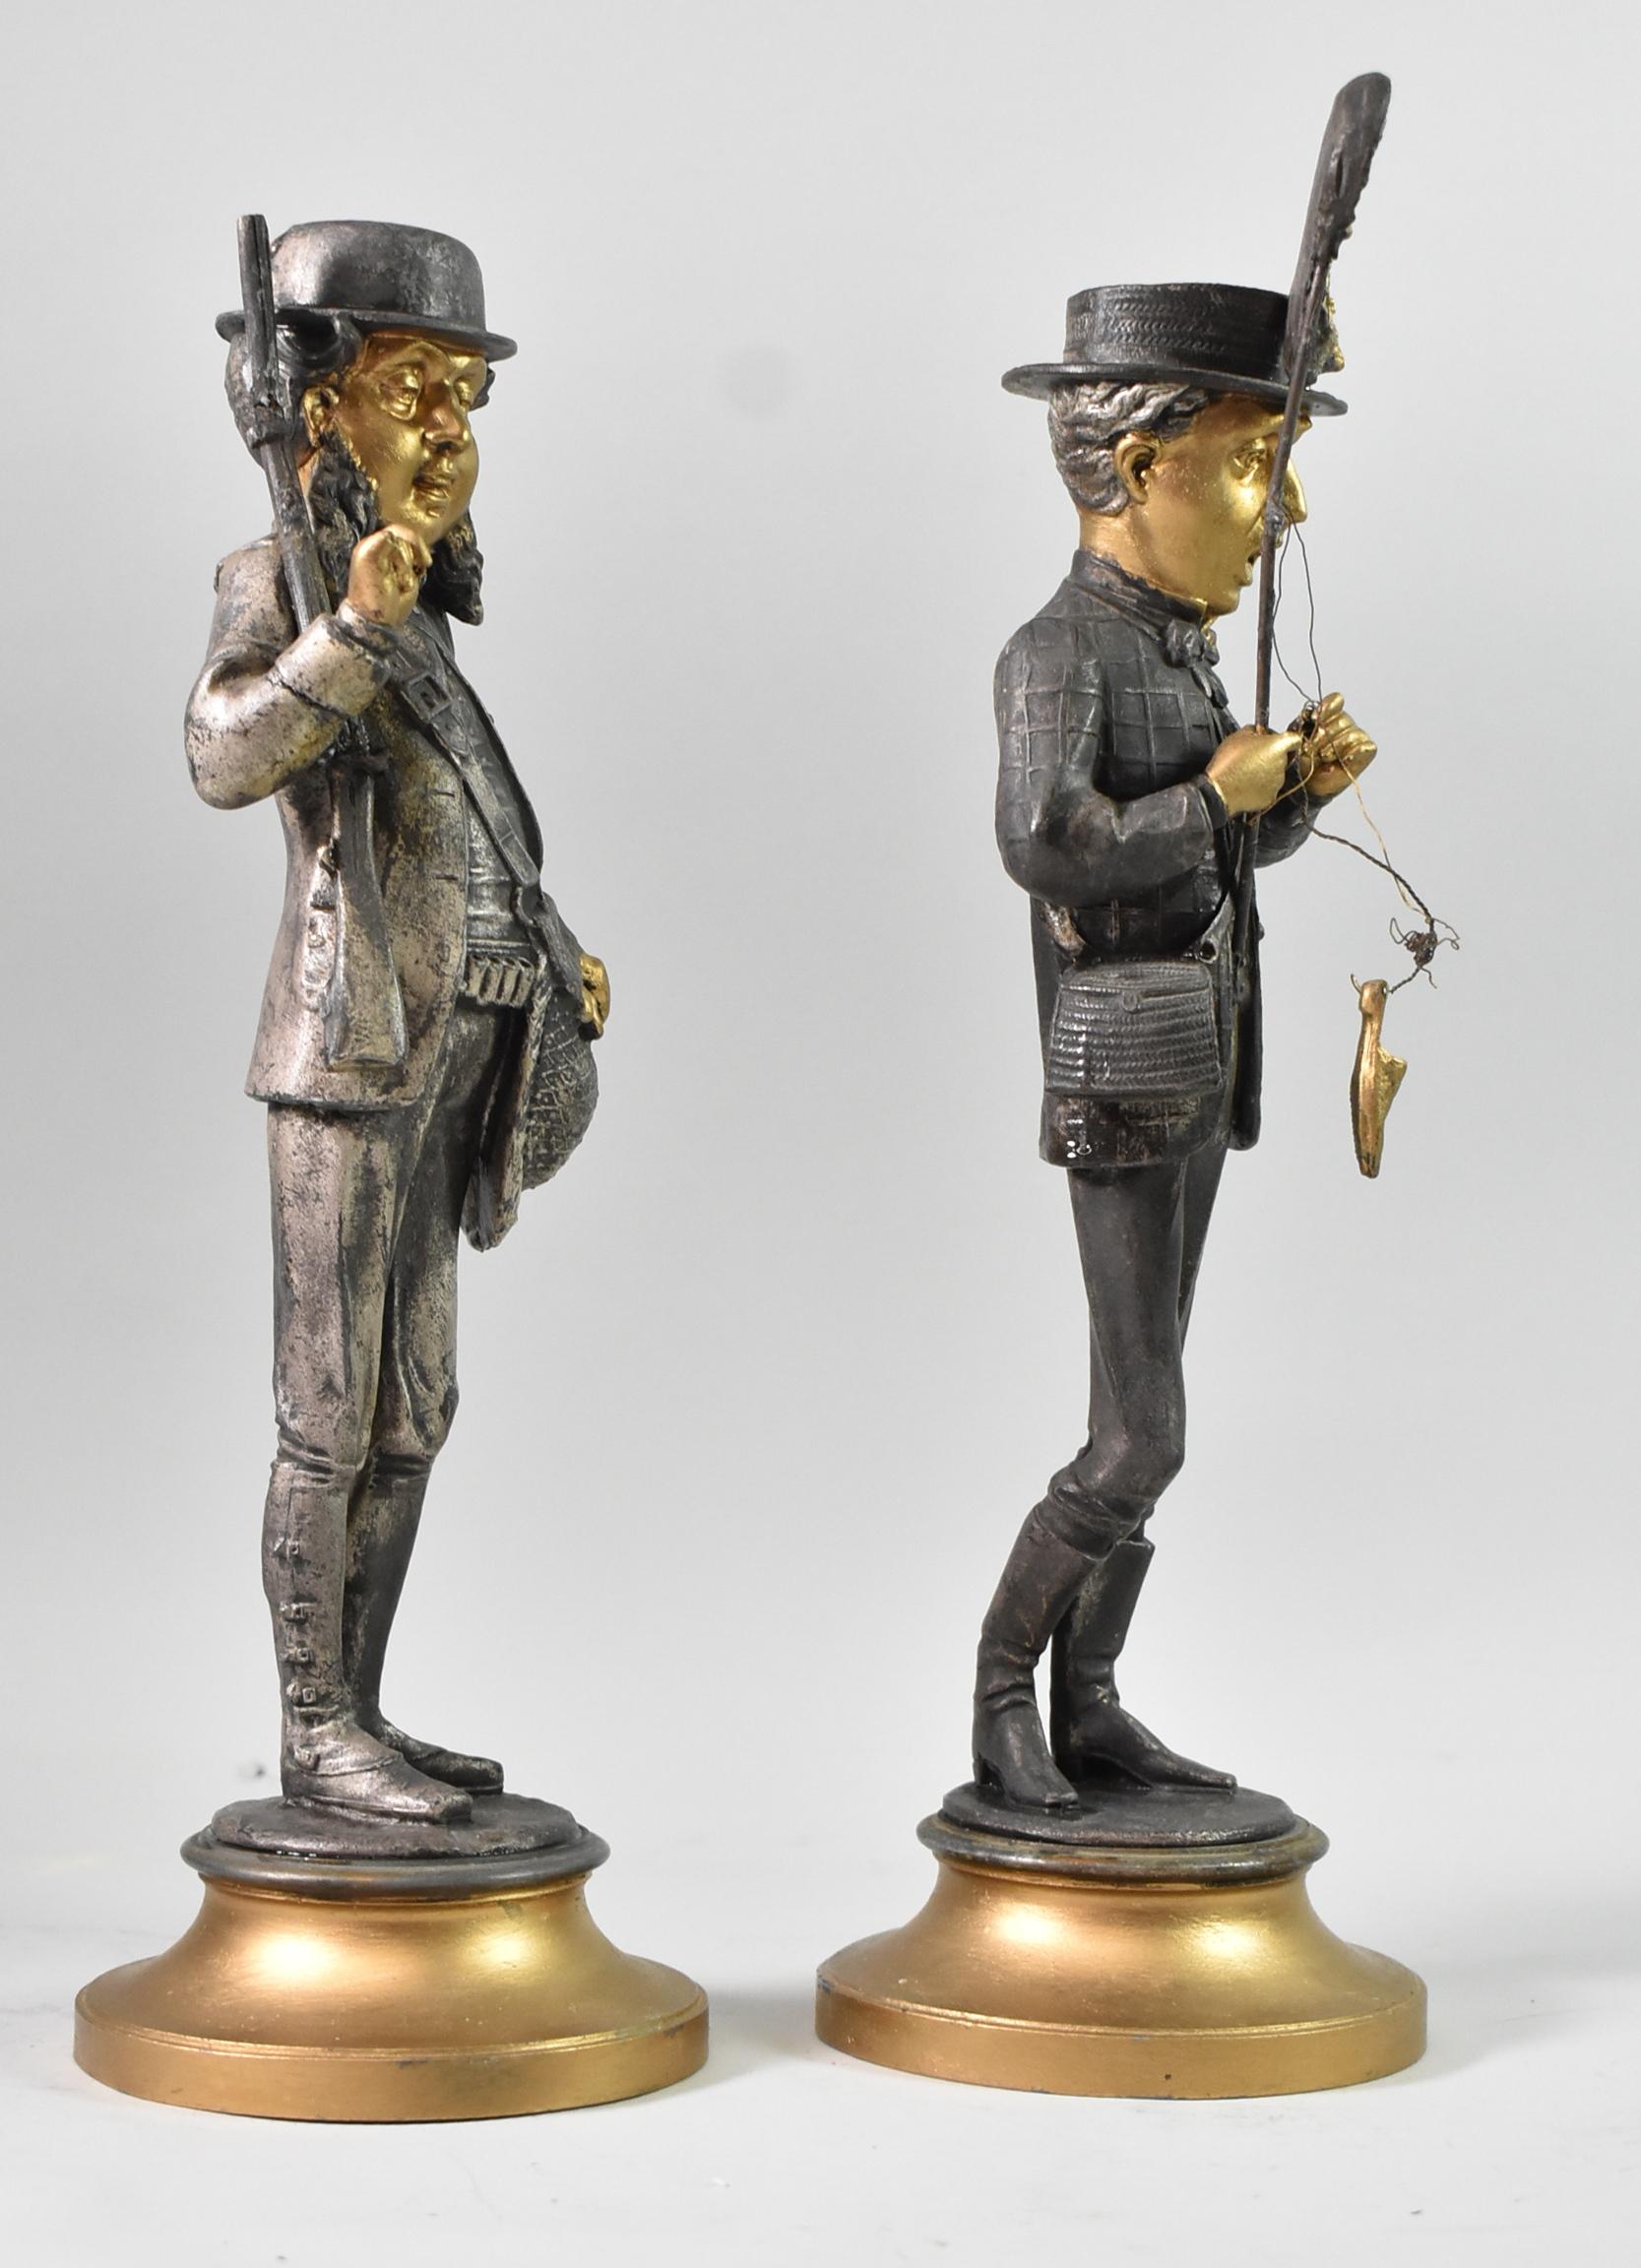 These metal candlestick holders have many gold details, including the faces, hands and bases. The fisherman features a net that is caught in his shoe and the hunter carries a rifle. Each figure stands 13